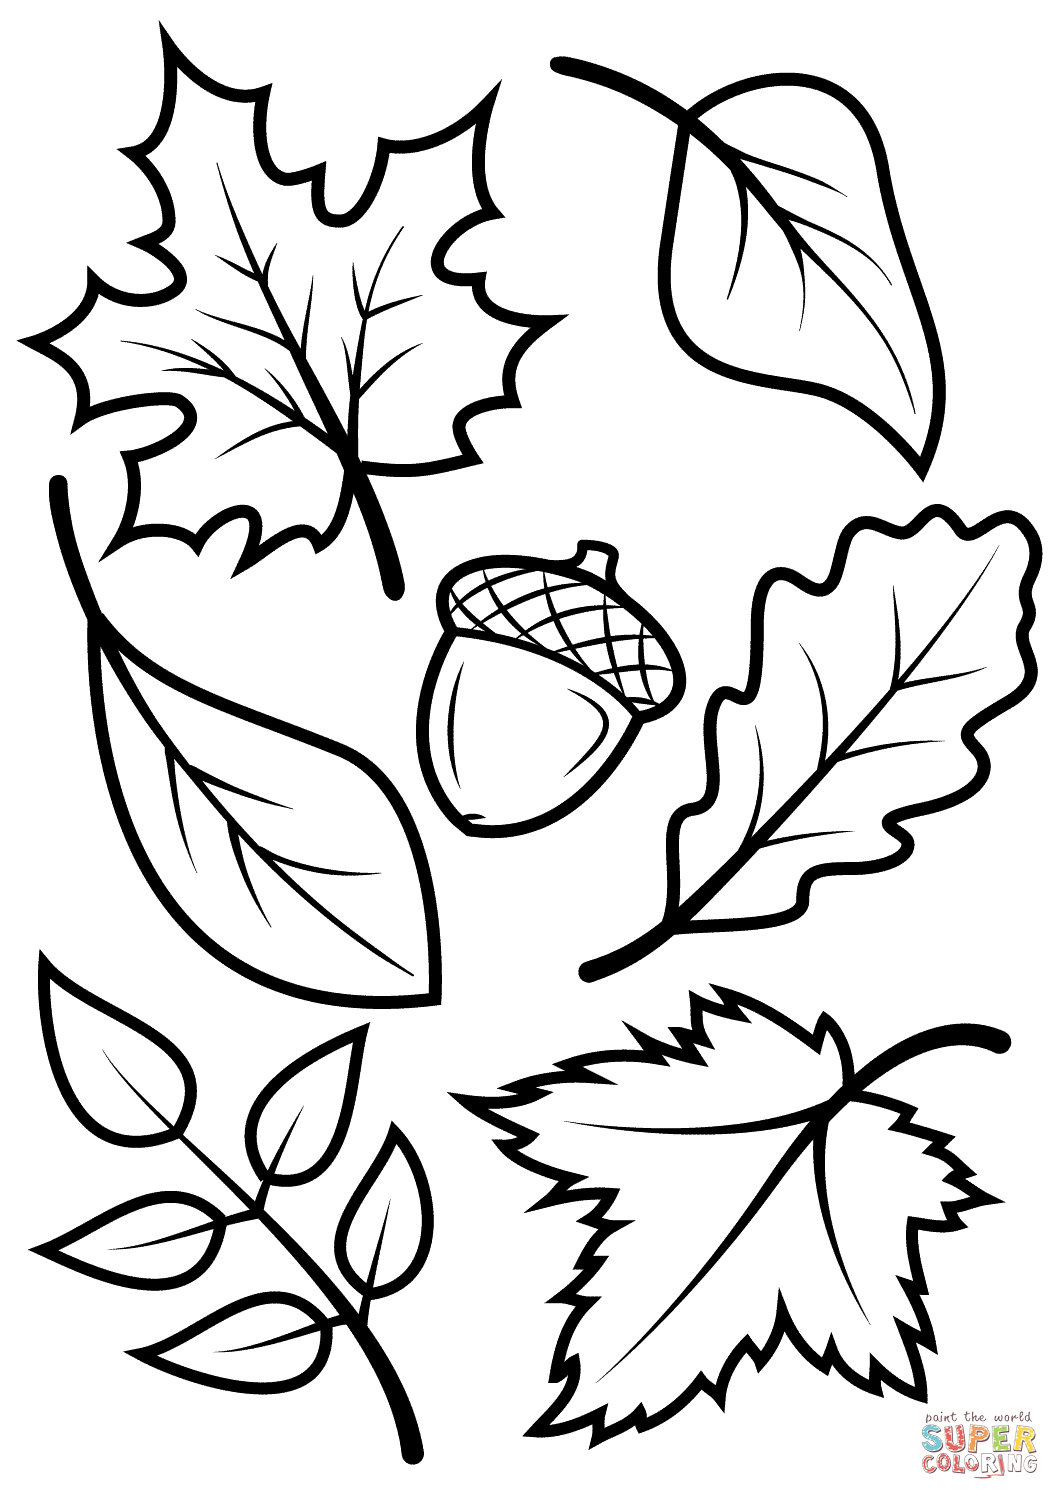 Fall Leaves And Acorn Coloring Page | Free Printable Coloring Pages - Free Printable Autumn Coloring Sheets